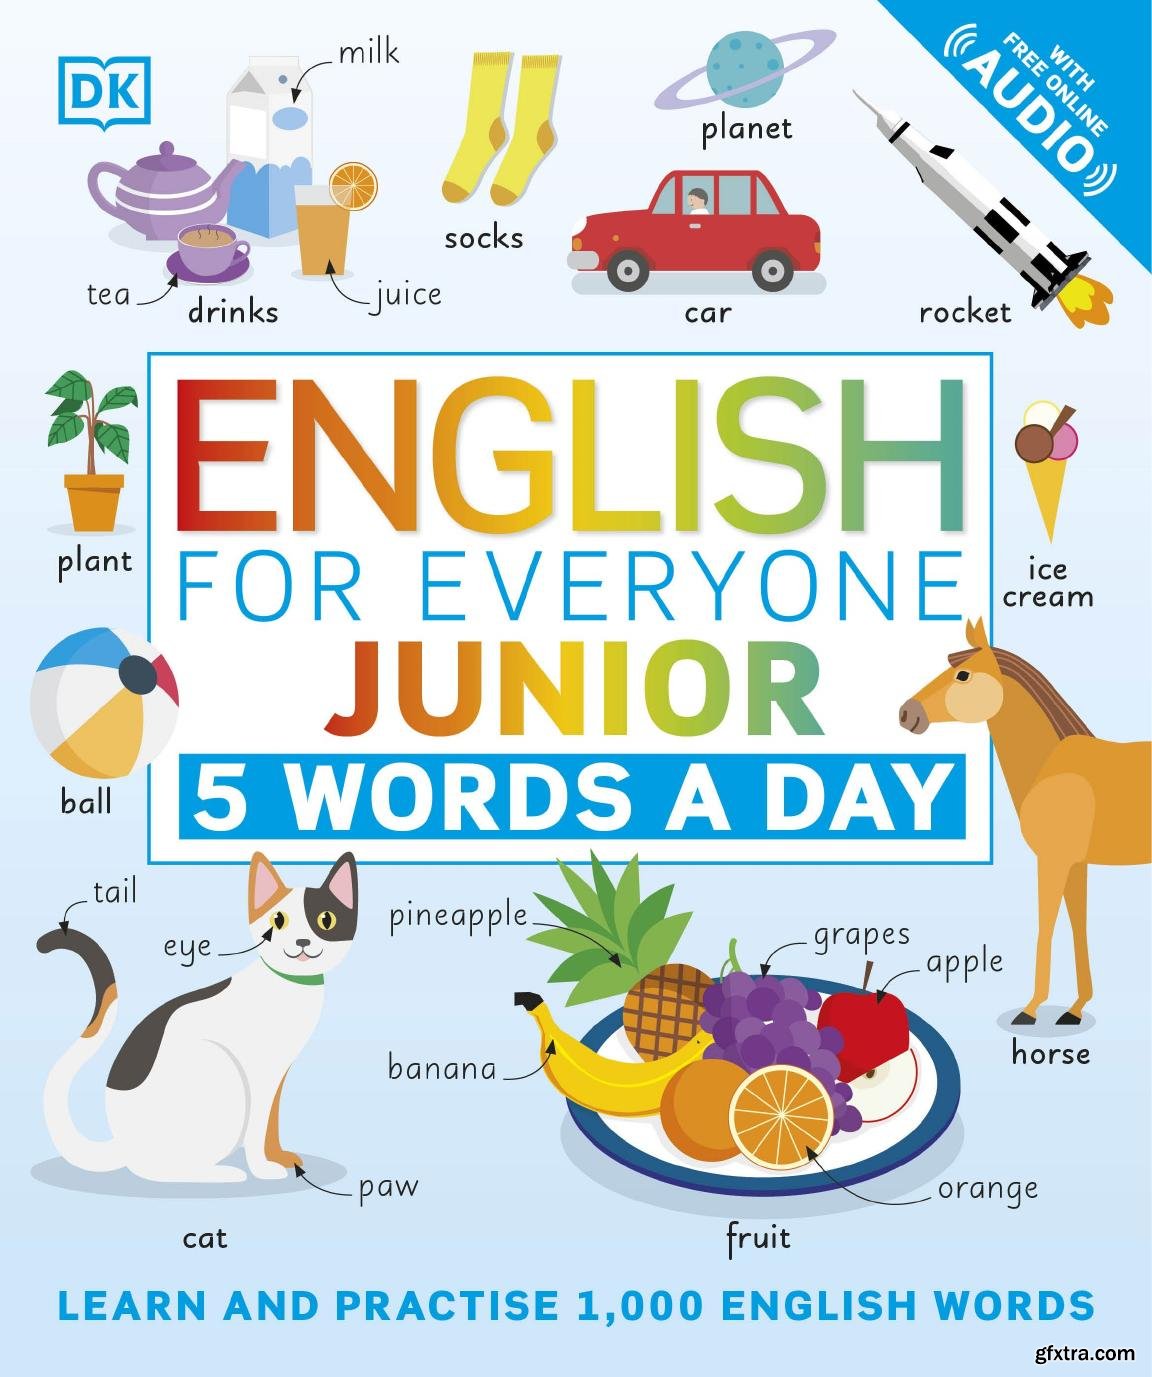 English for Everyone Junior 5 Words a Day: Learn and Practise 1,000